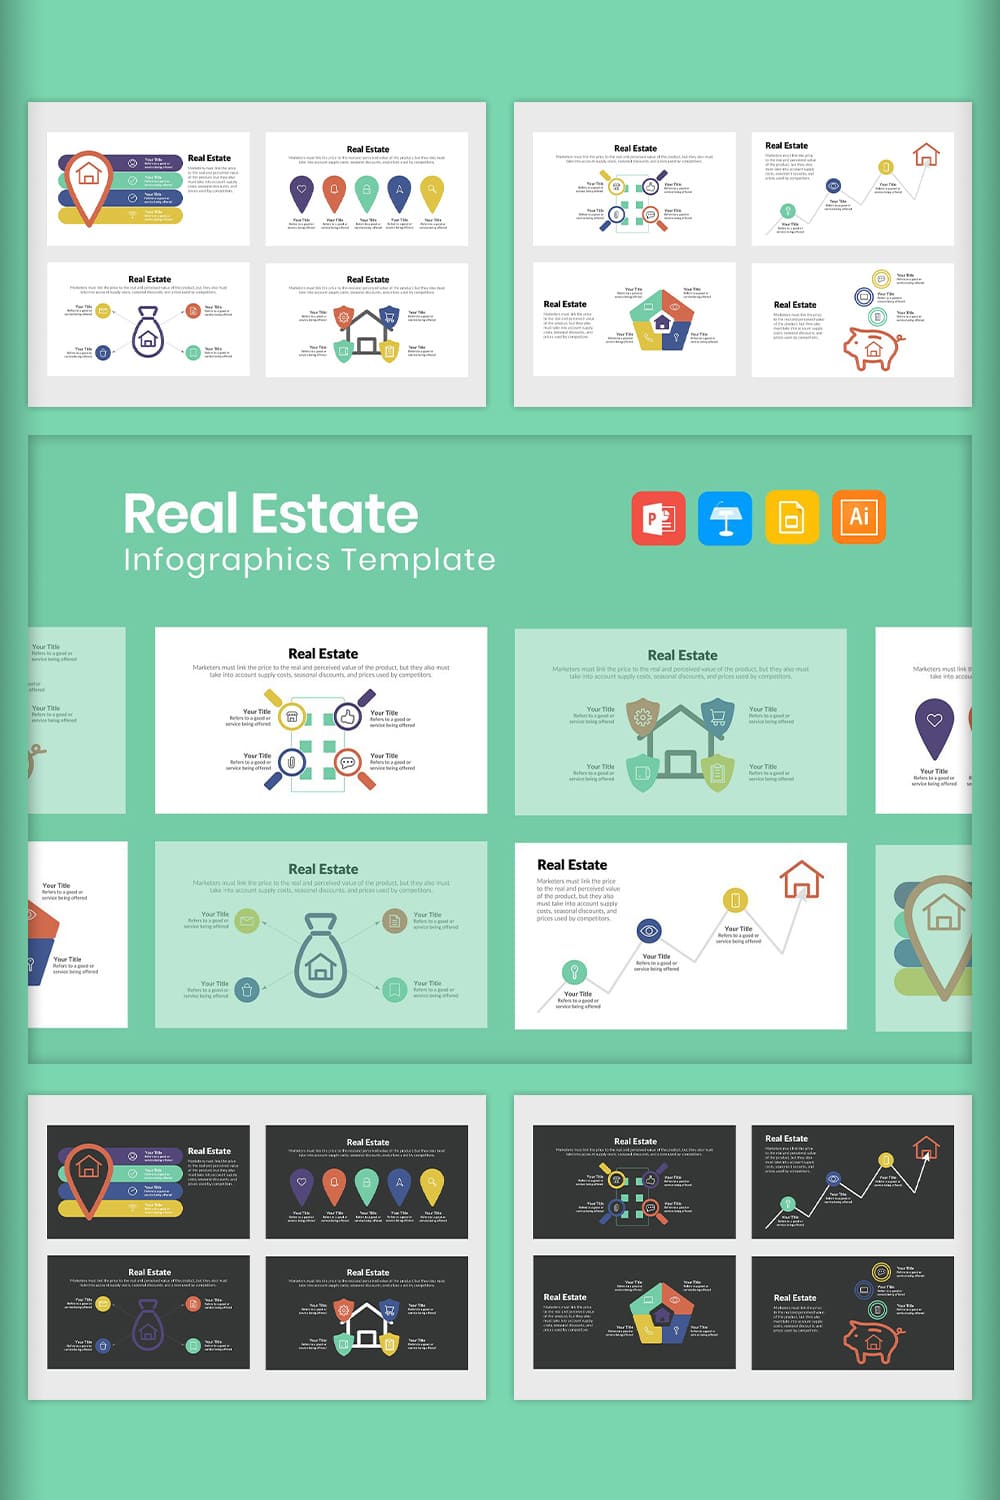 Real Estate for PowerPoint.